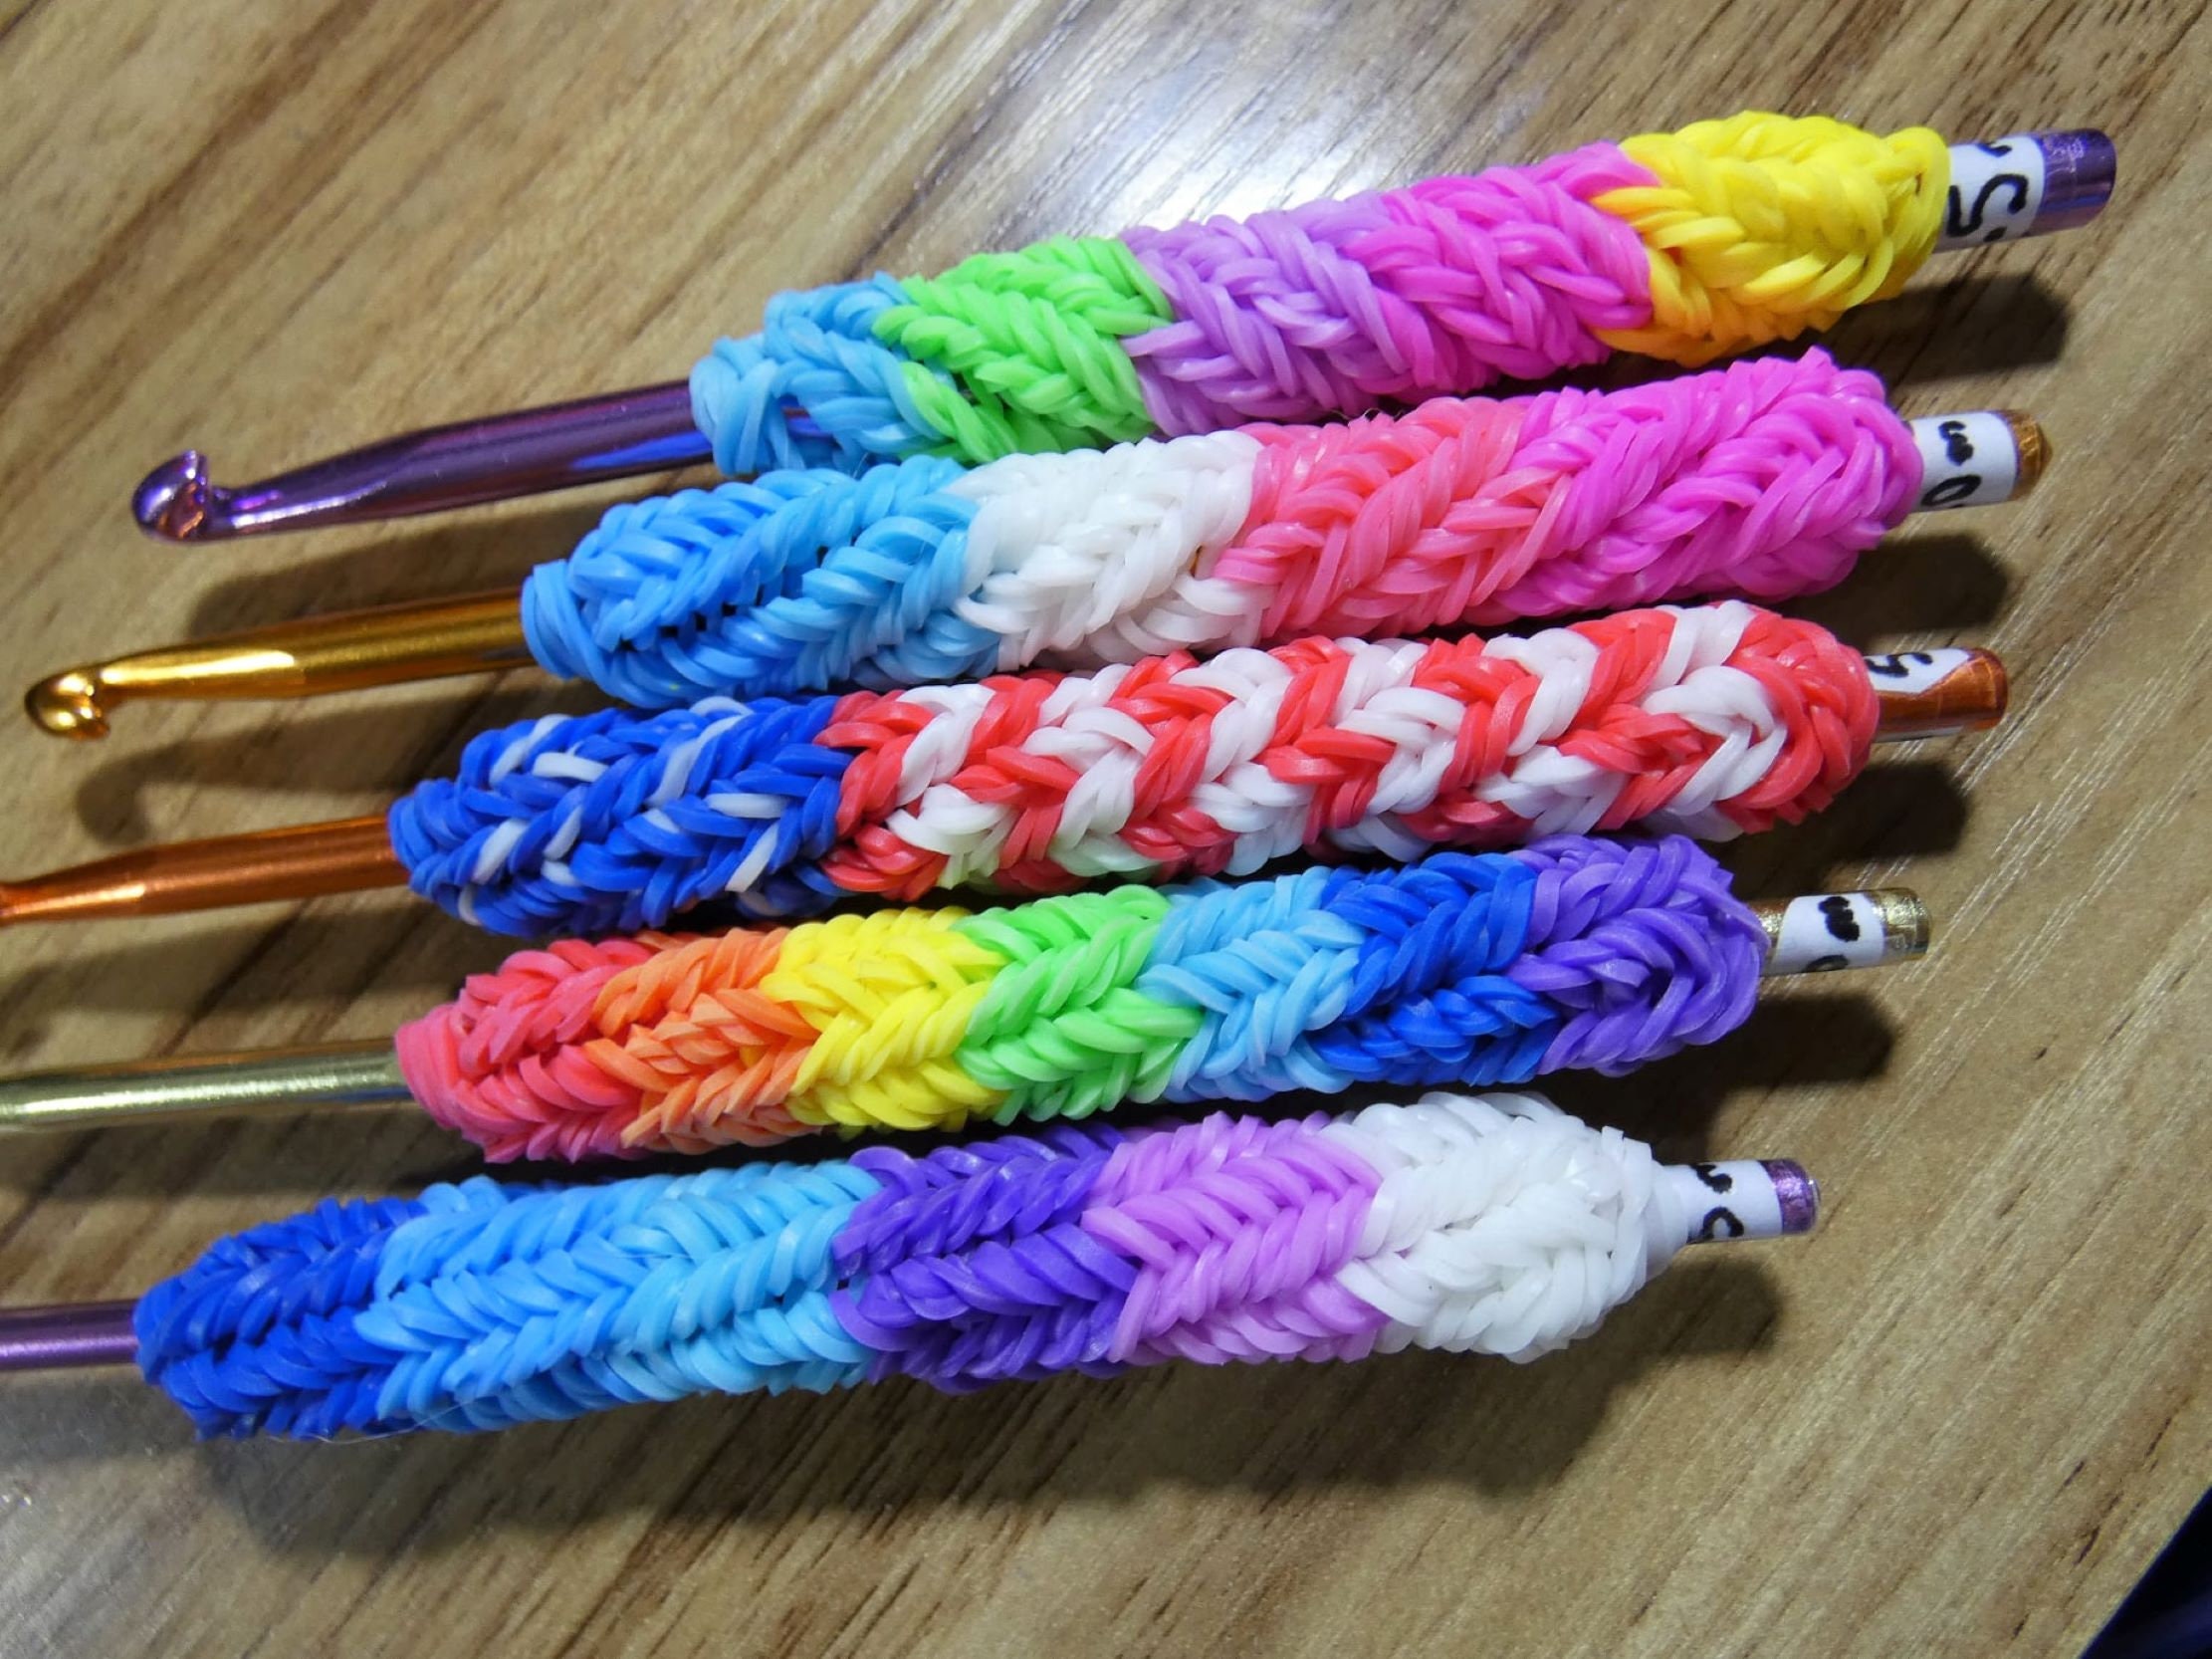 Perfect crochet hook grips with rainbow loom! Followed tutorial for pencil  grips from the parenting chann…